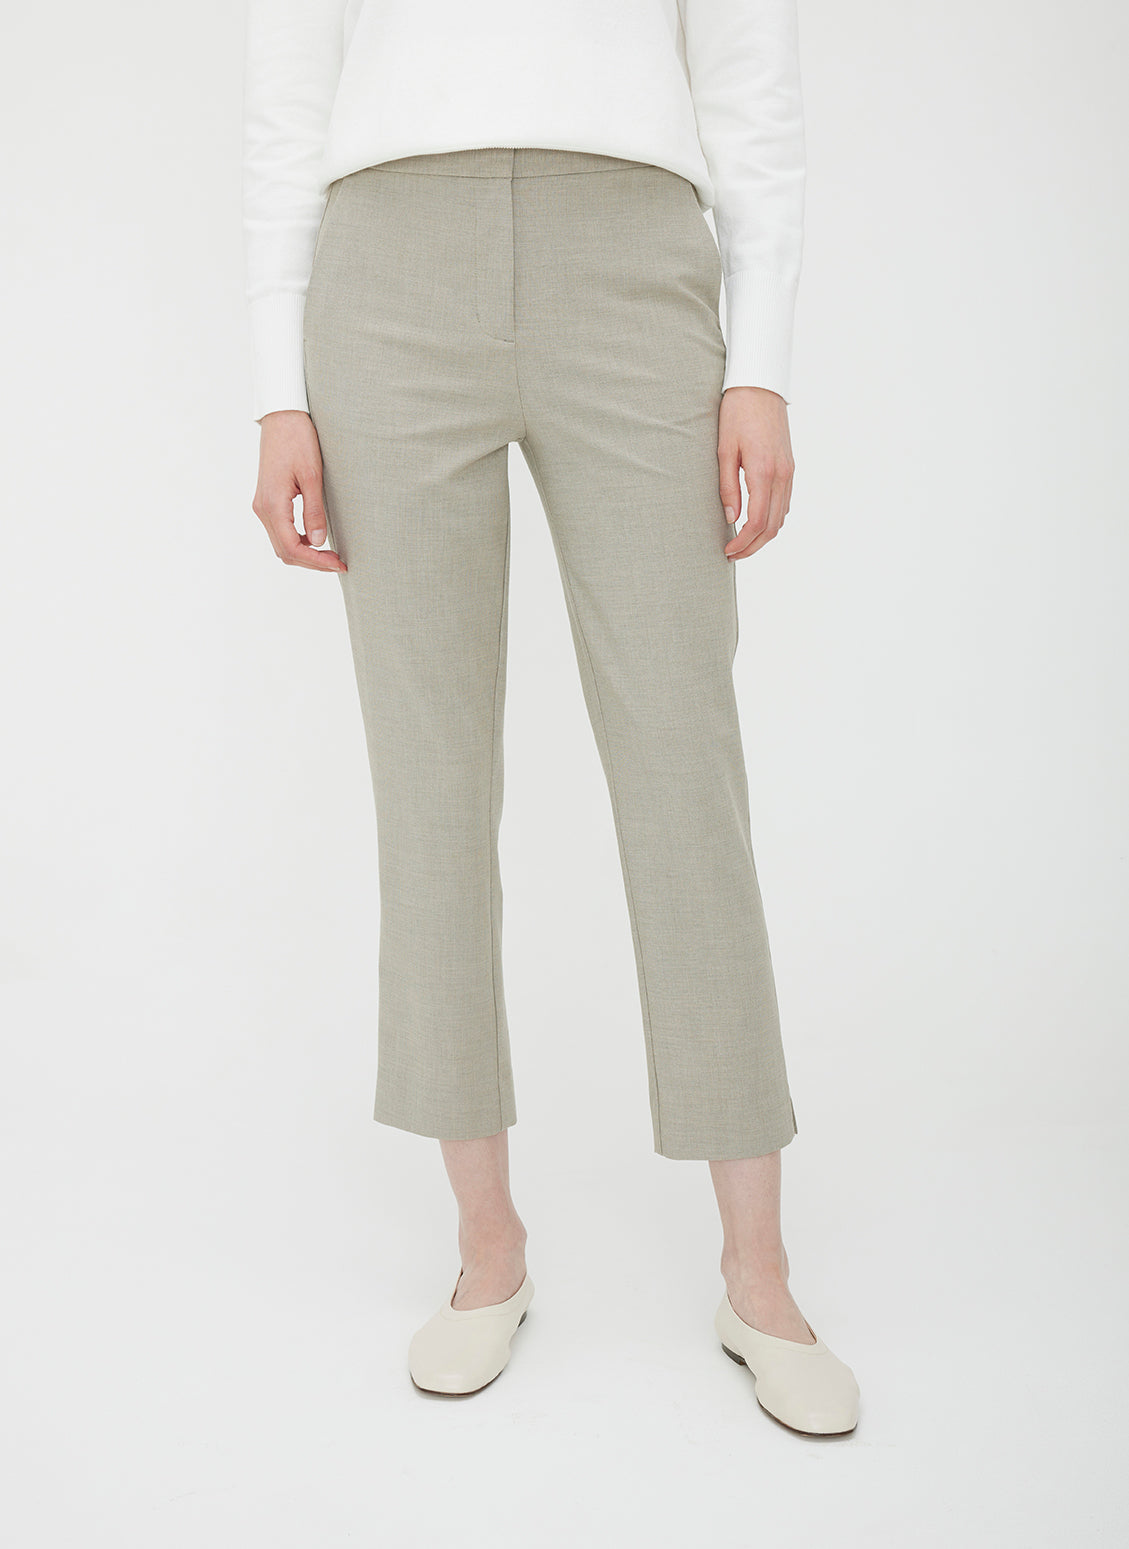 Kenzo Flared Cropped Pants women - Glamood Outlet